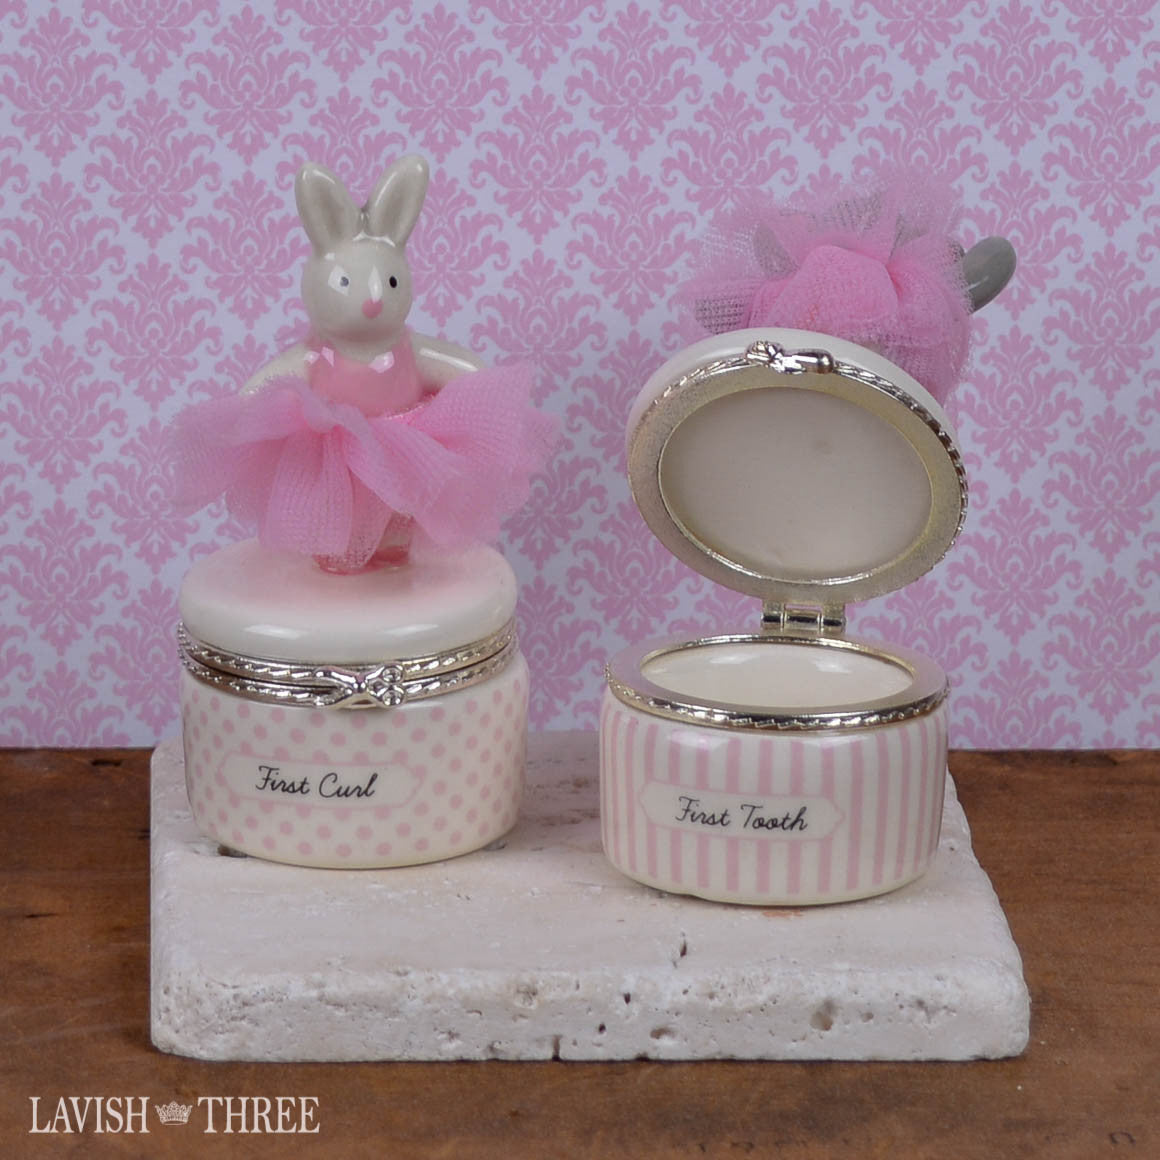 Little Princess' first tooth and curl ceramic baby keepsake